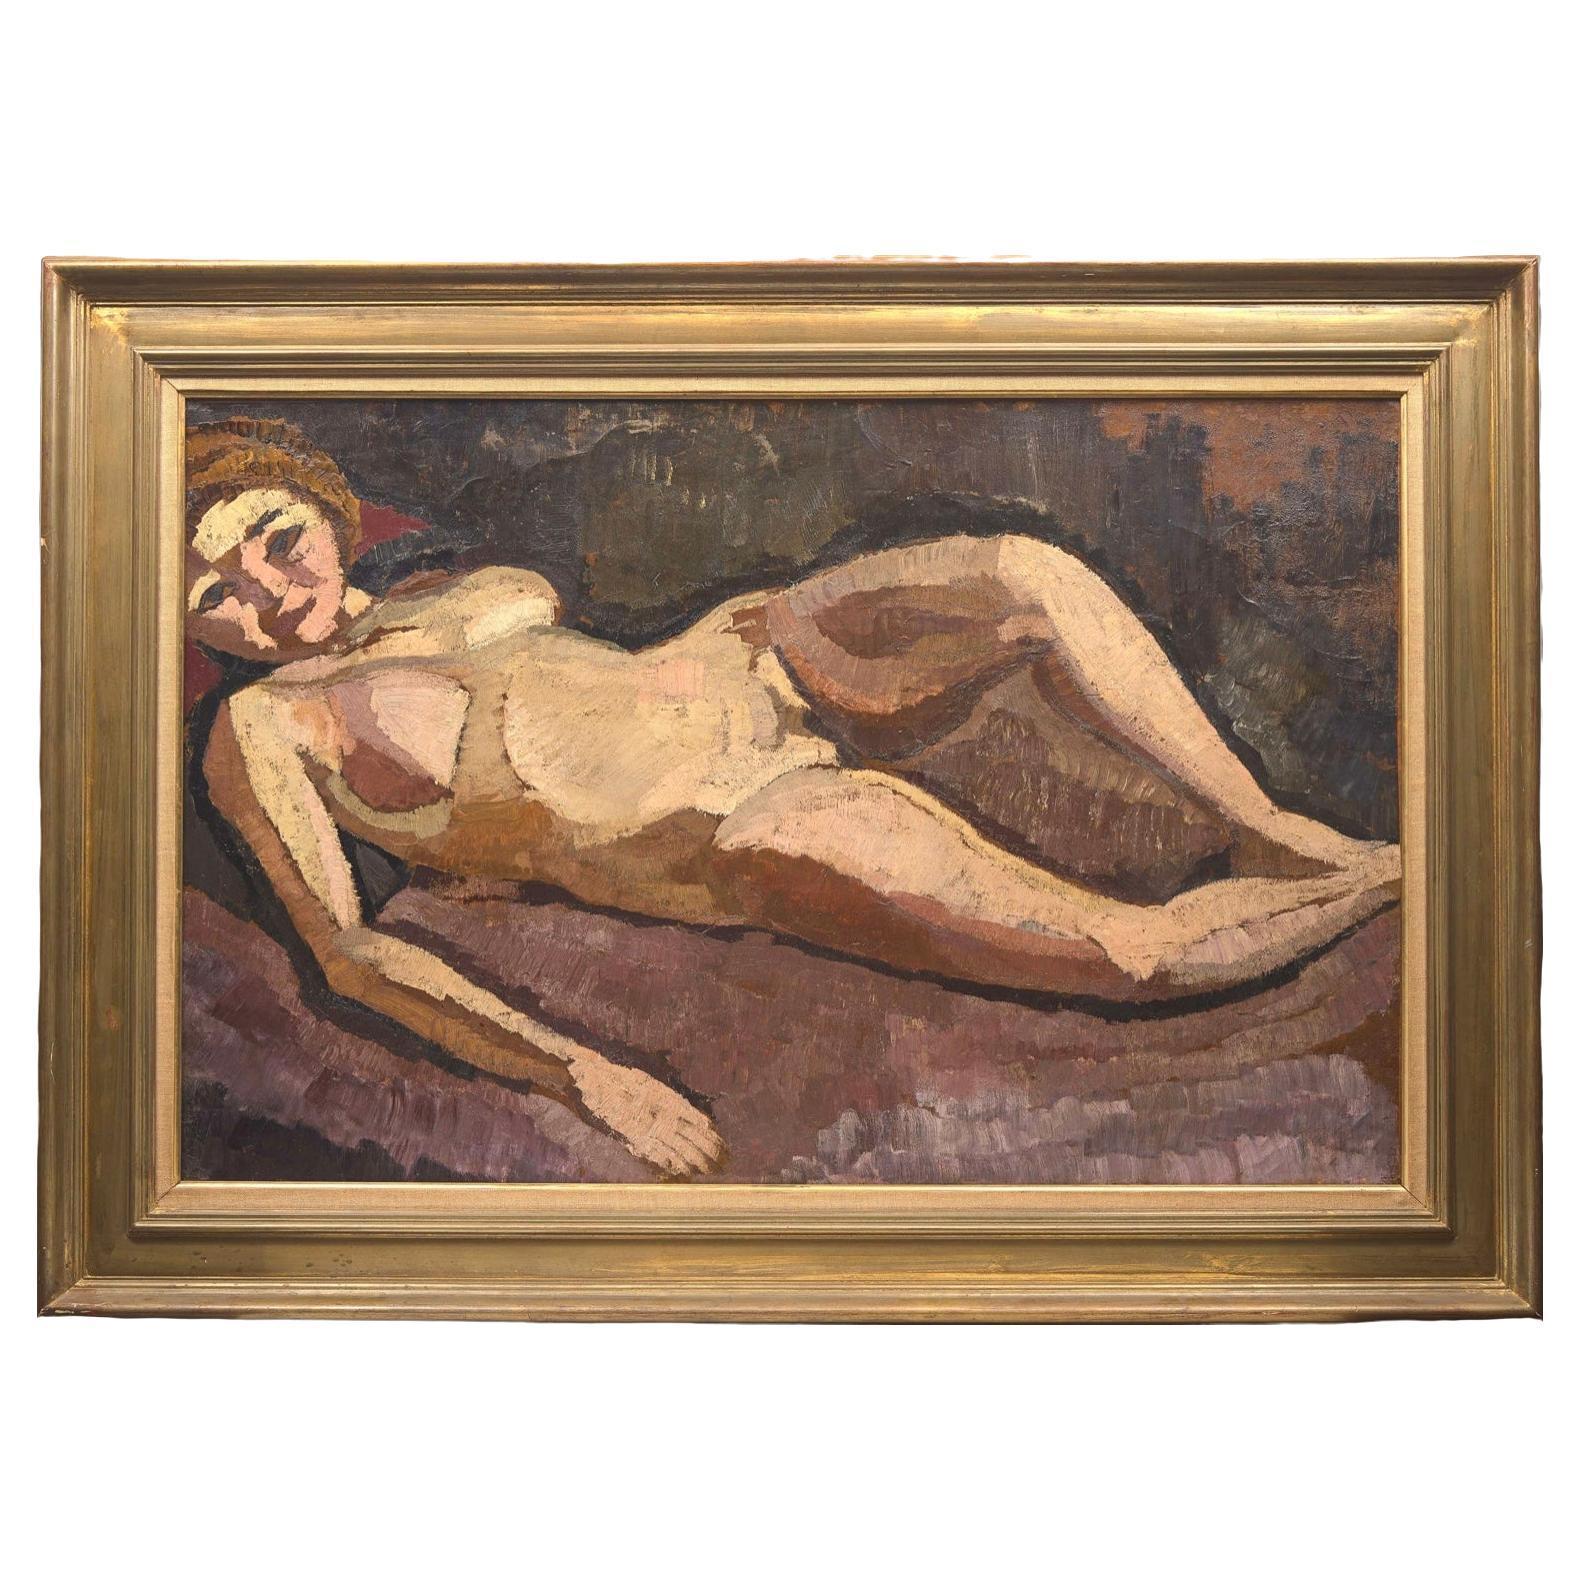 Roger de la Fresnaye (French, 1885-1925) - Femme Nue Couchée - Painting by Unknown